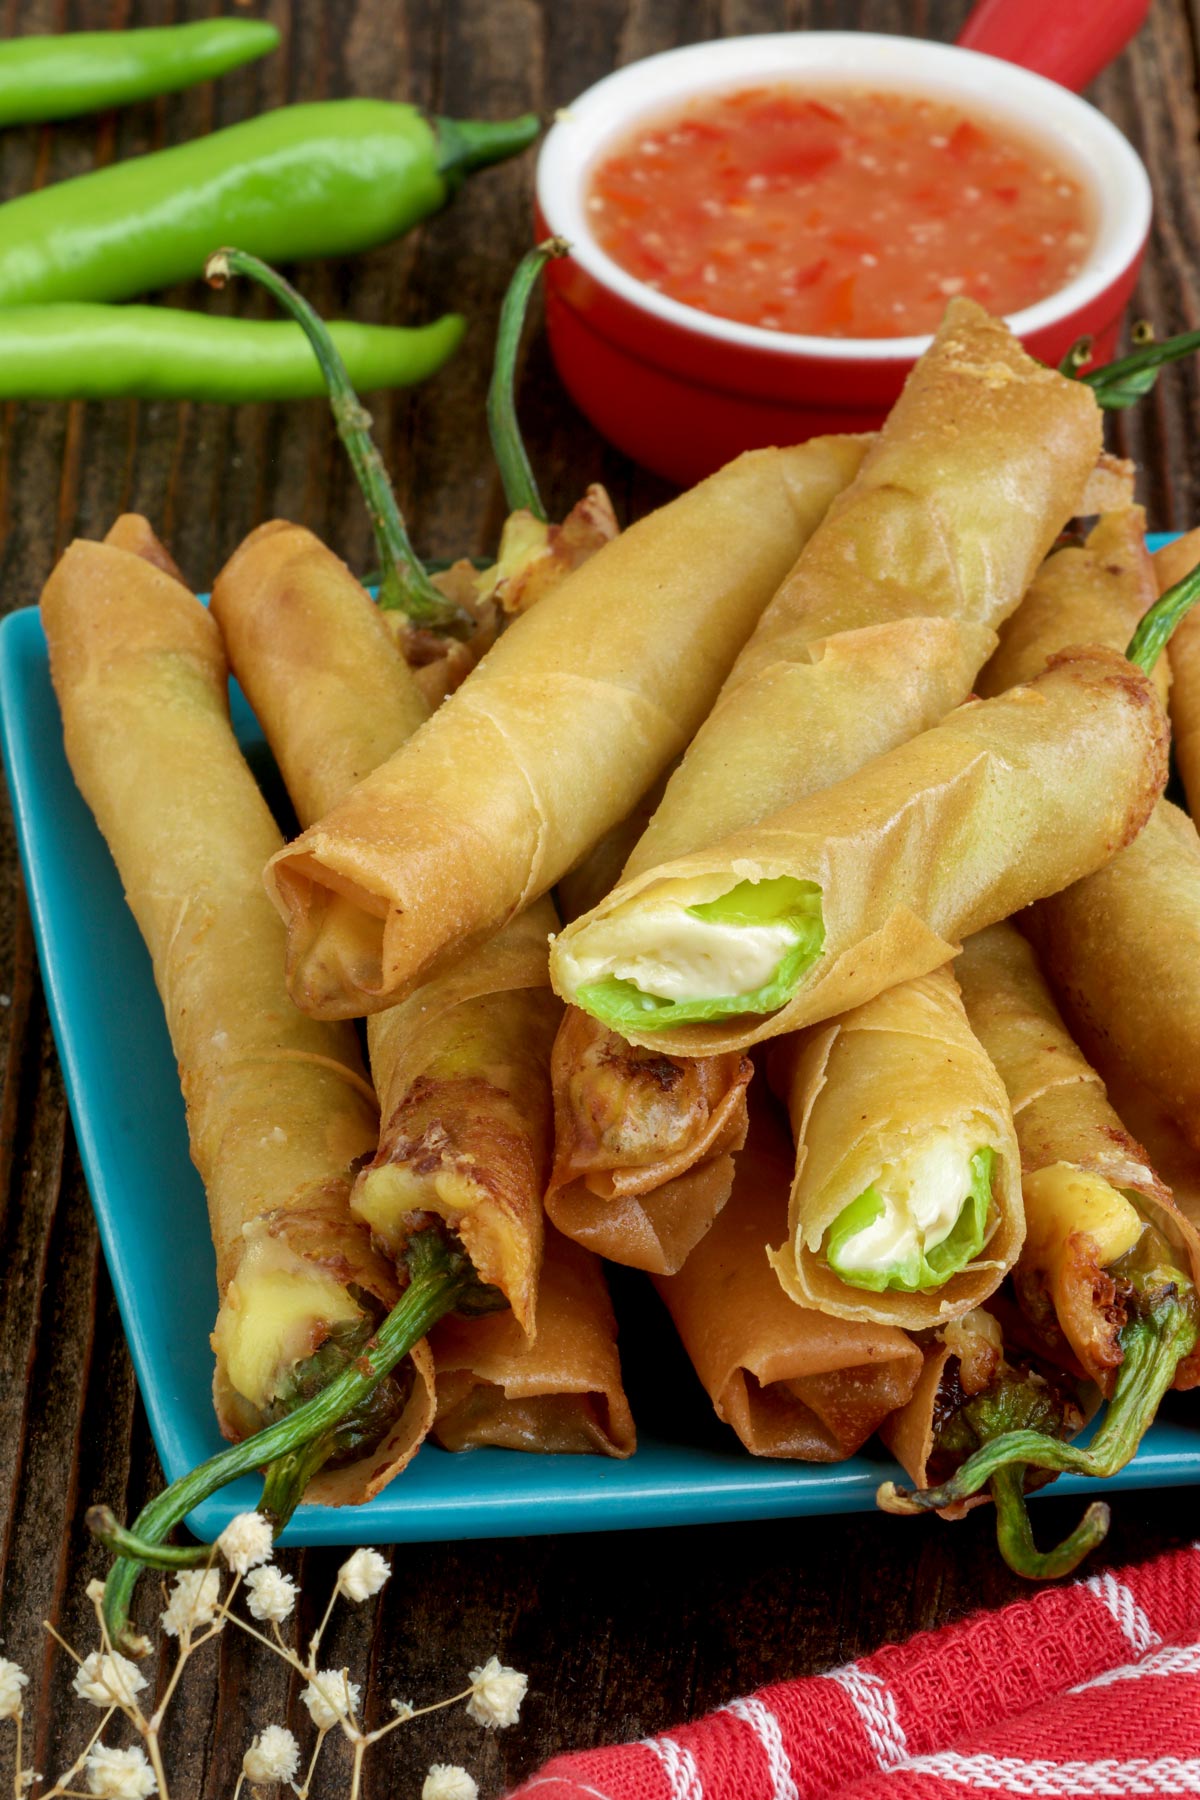 Cheesy and crunchy Dynamite Lumpia with sweet and sour sauce on the side.